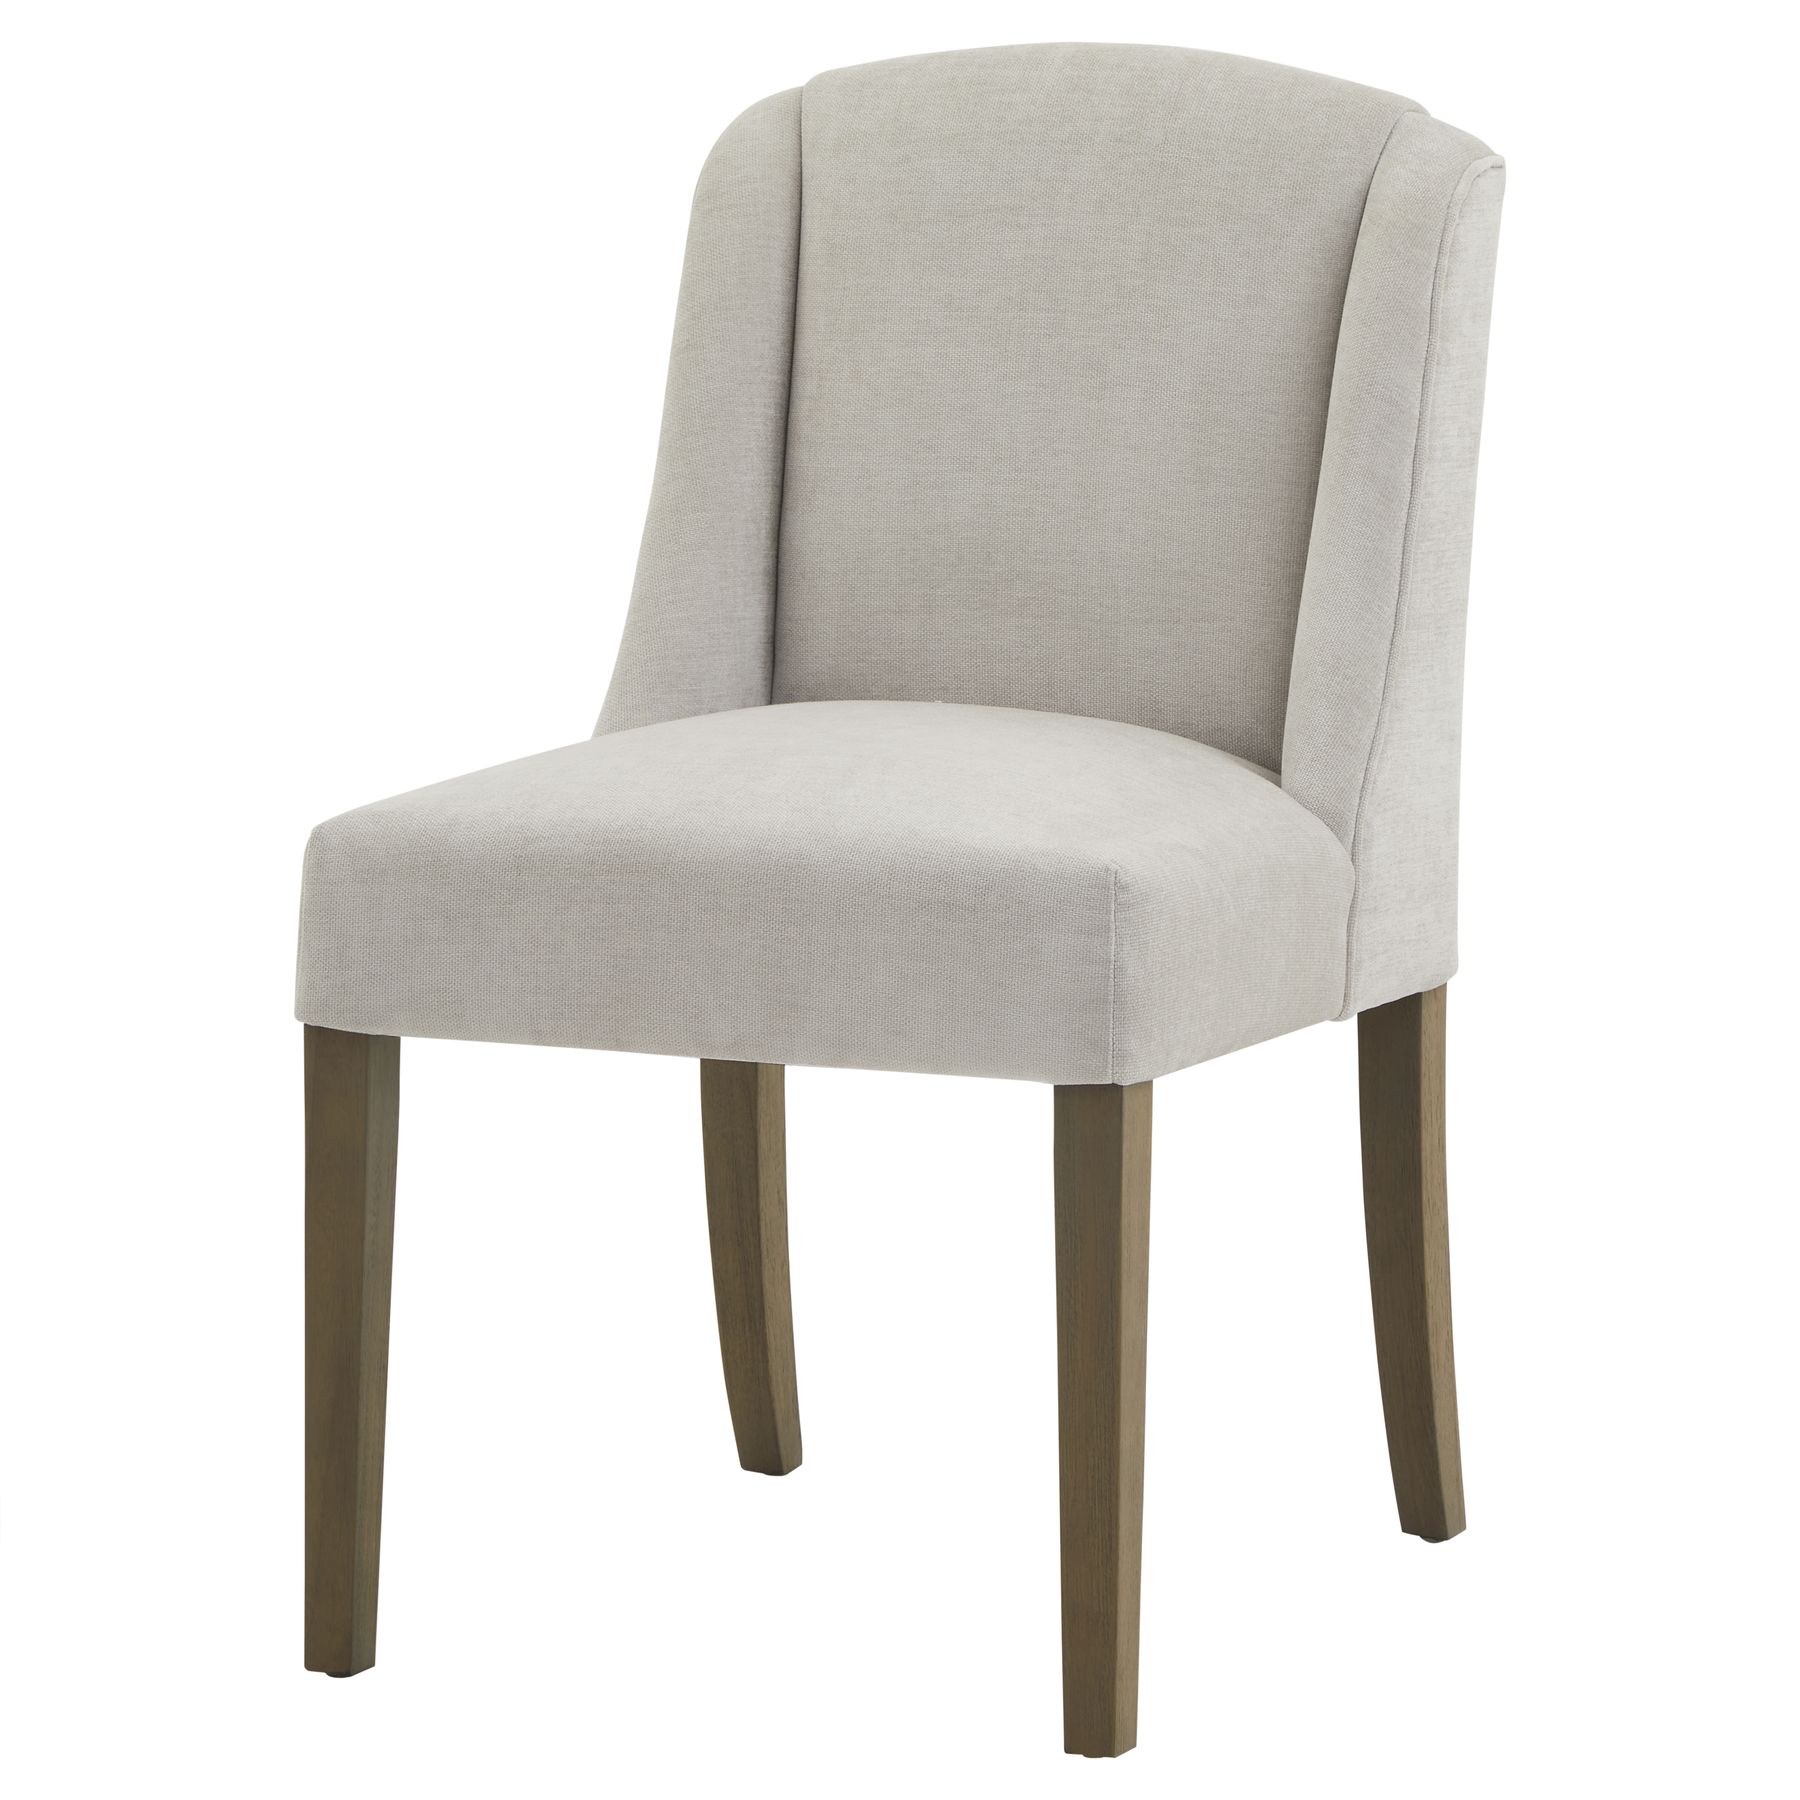 Compton Grey Dining Chair - Image 1